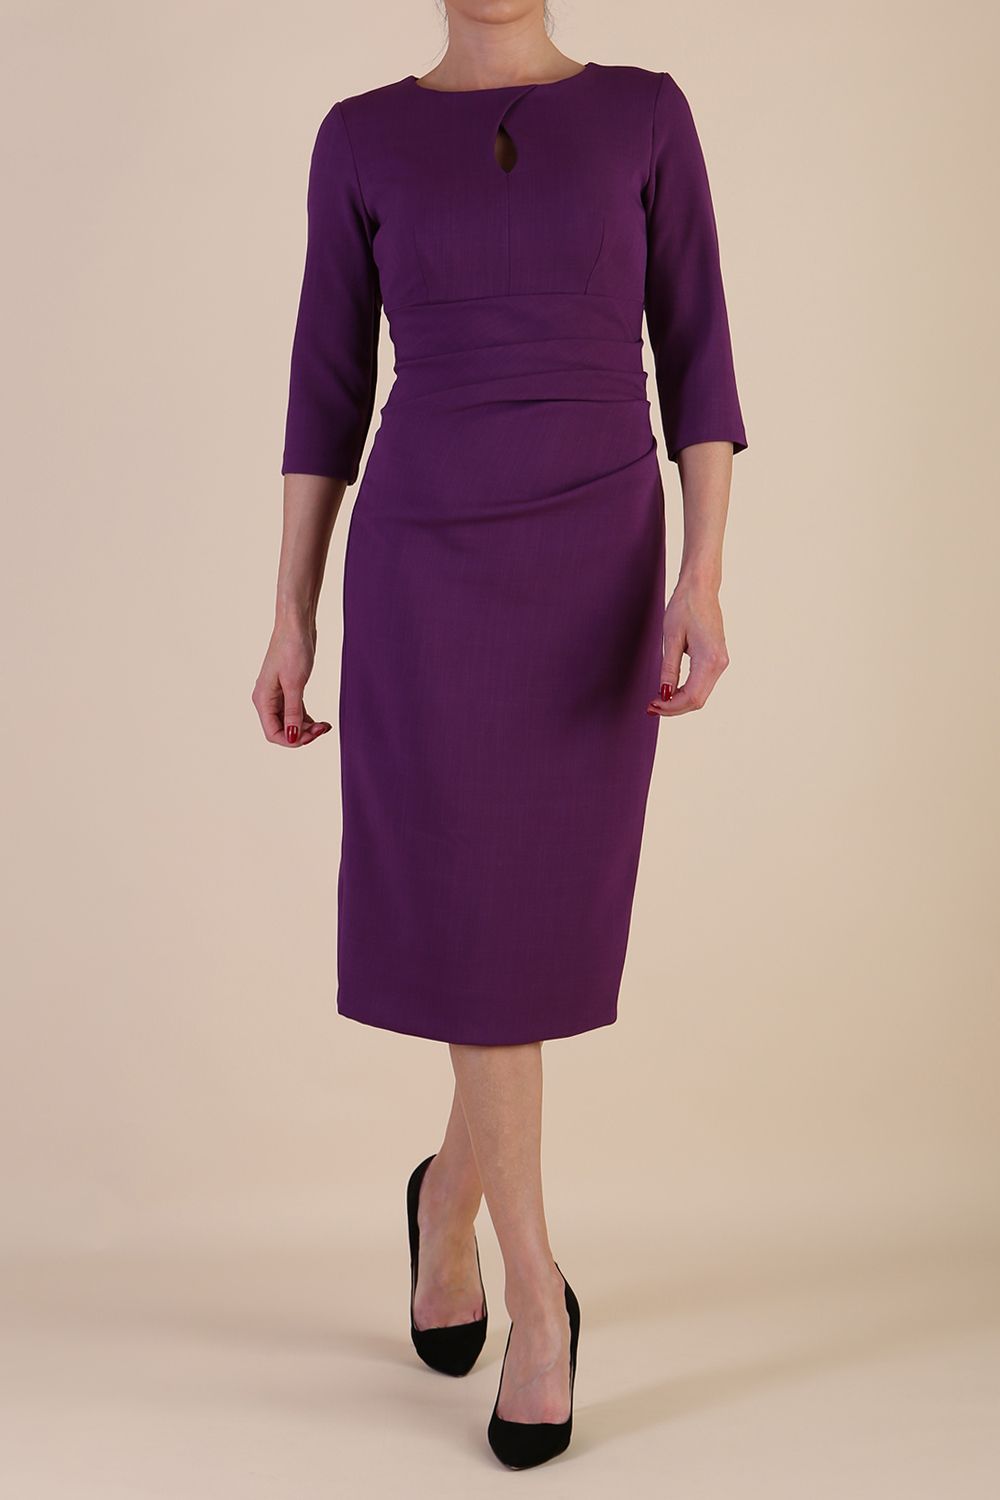 model is wearing the Diva Catwalk Ubrique pencil dress with Long sleeves and keyhole detail in Imperial Purple fabric colour